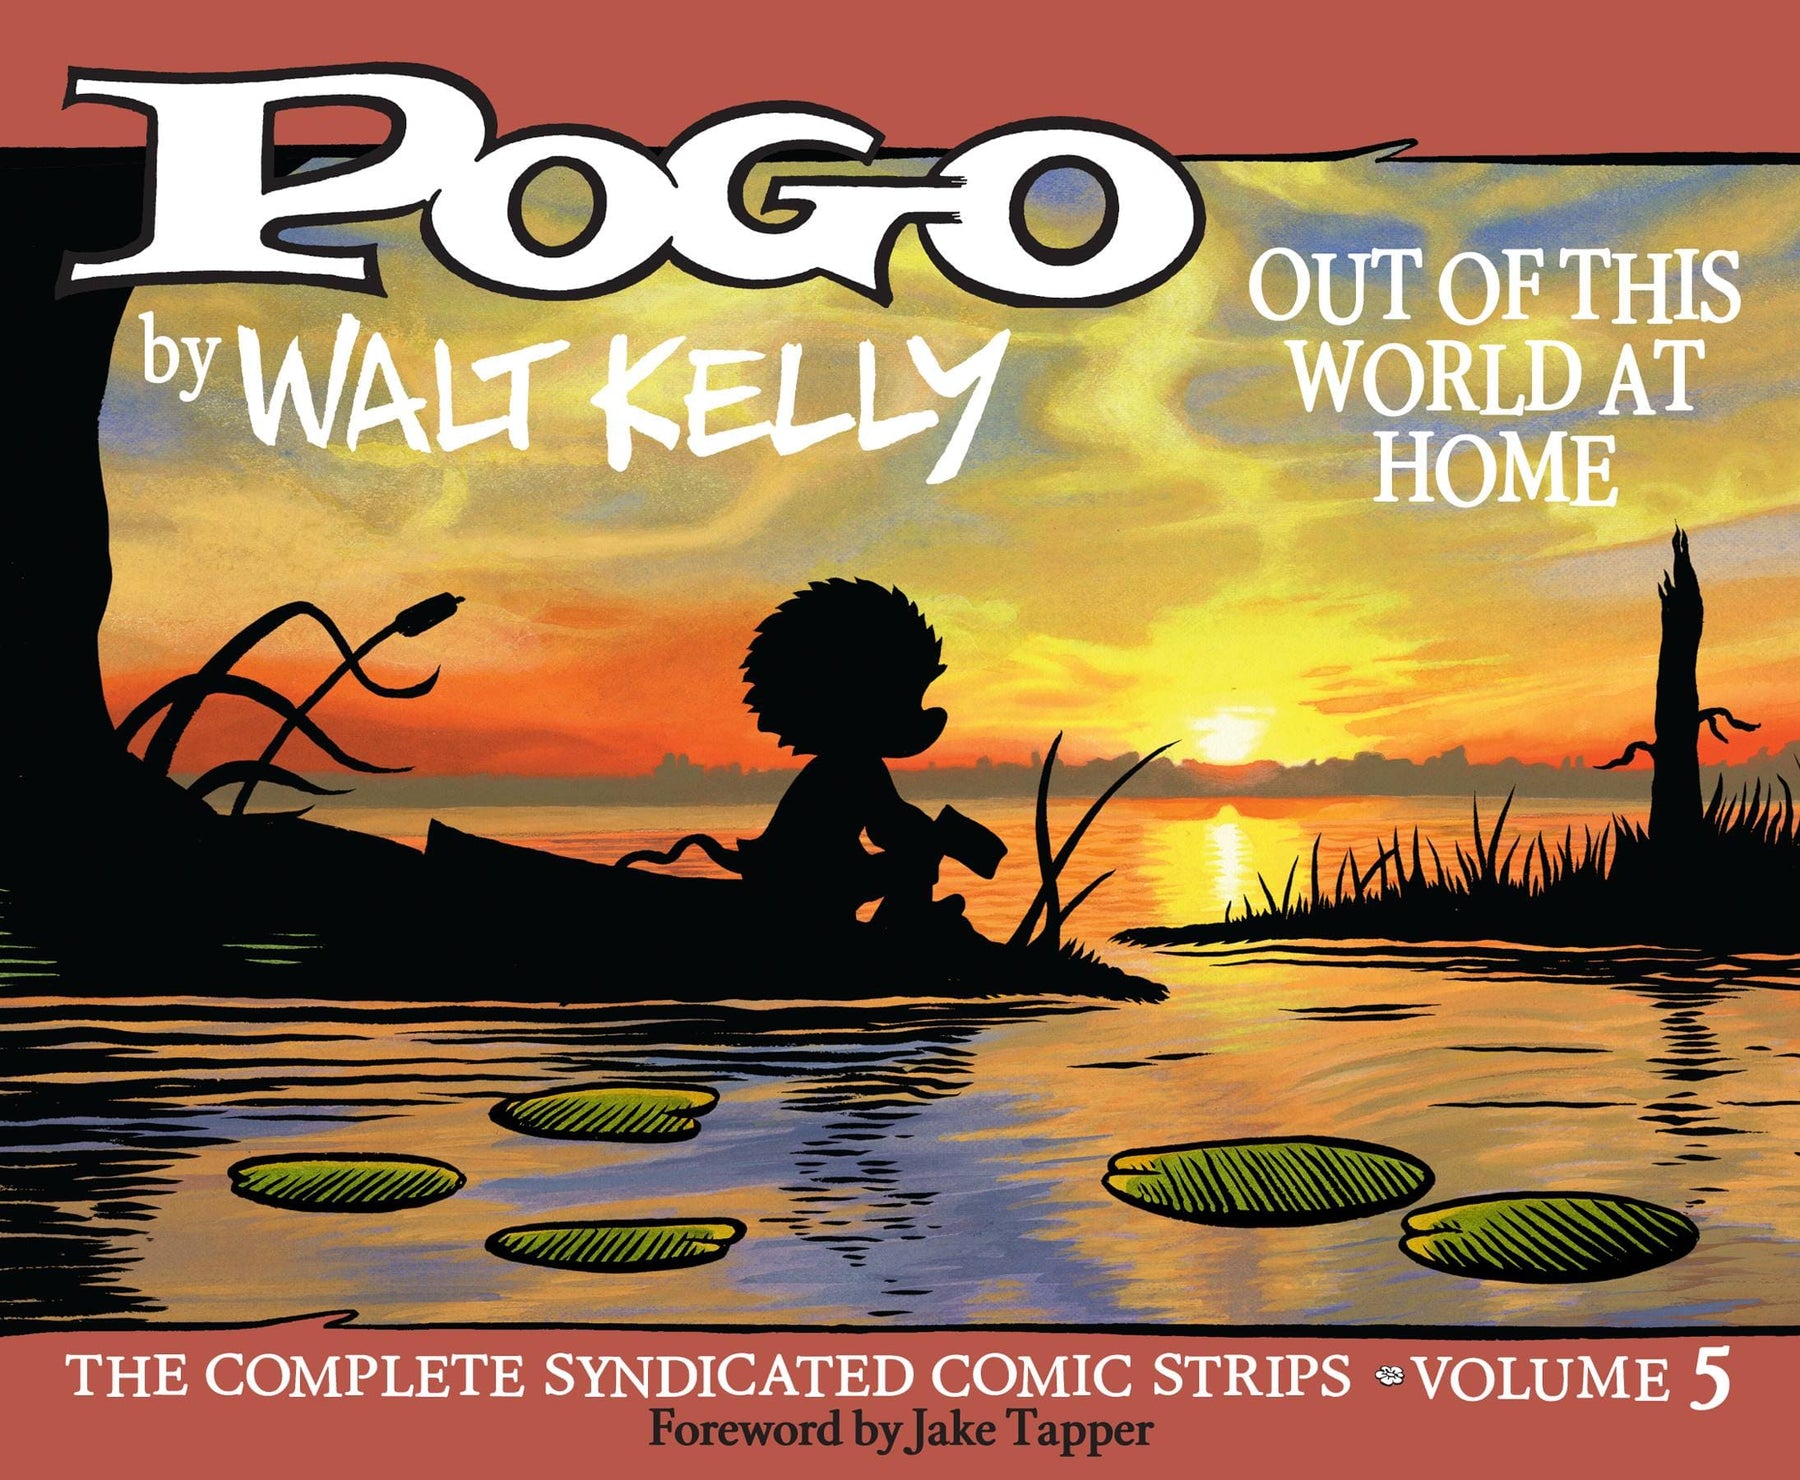 POGO COMP SYNDICATED STRIPS HC VOL 05 OUT WORLD HOME - Third Eye